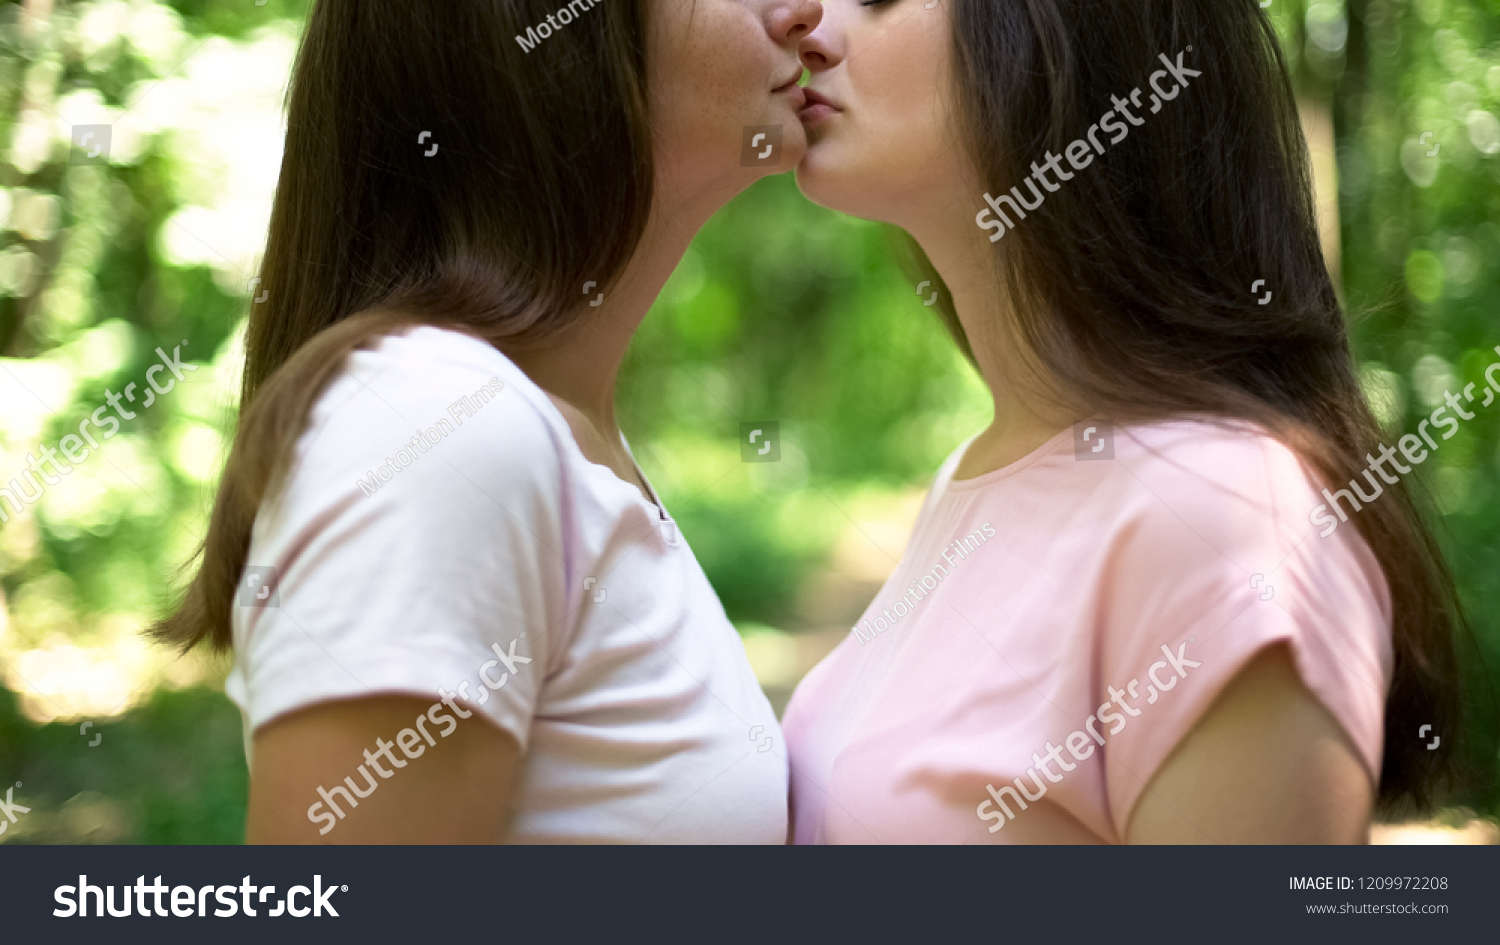 chelsea blodgett recommends Lesbians Making Out Hd